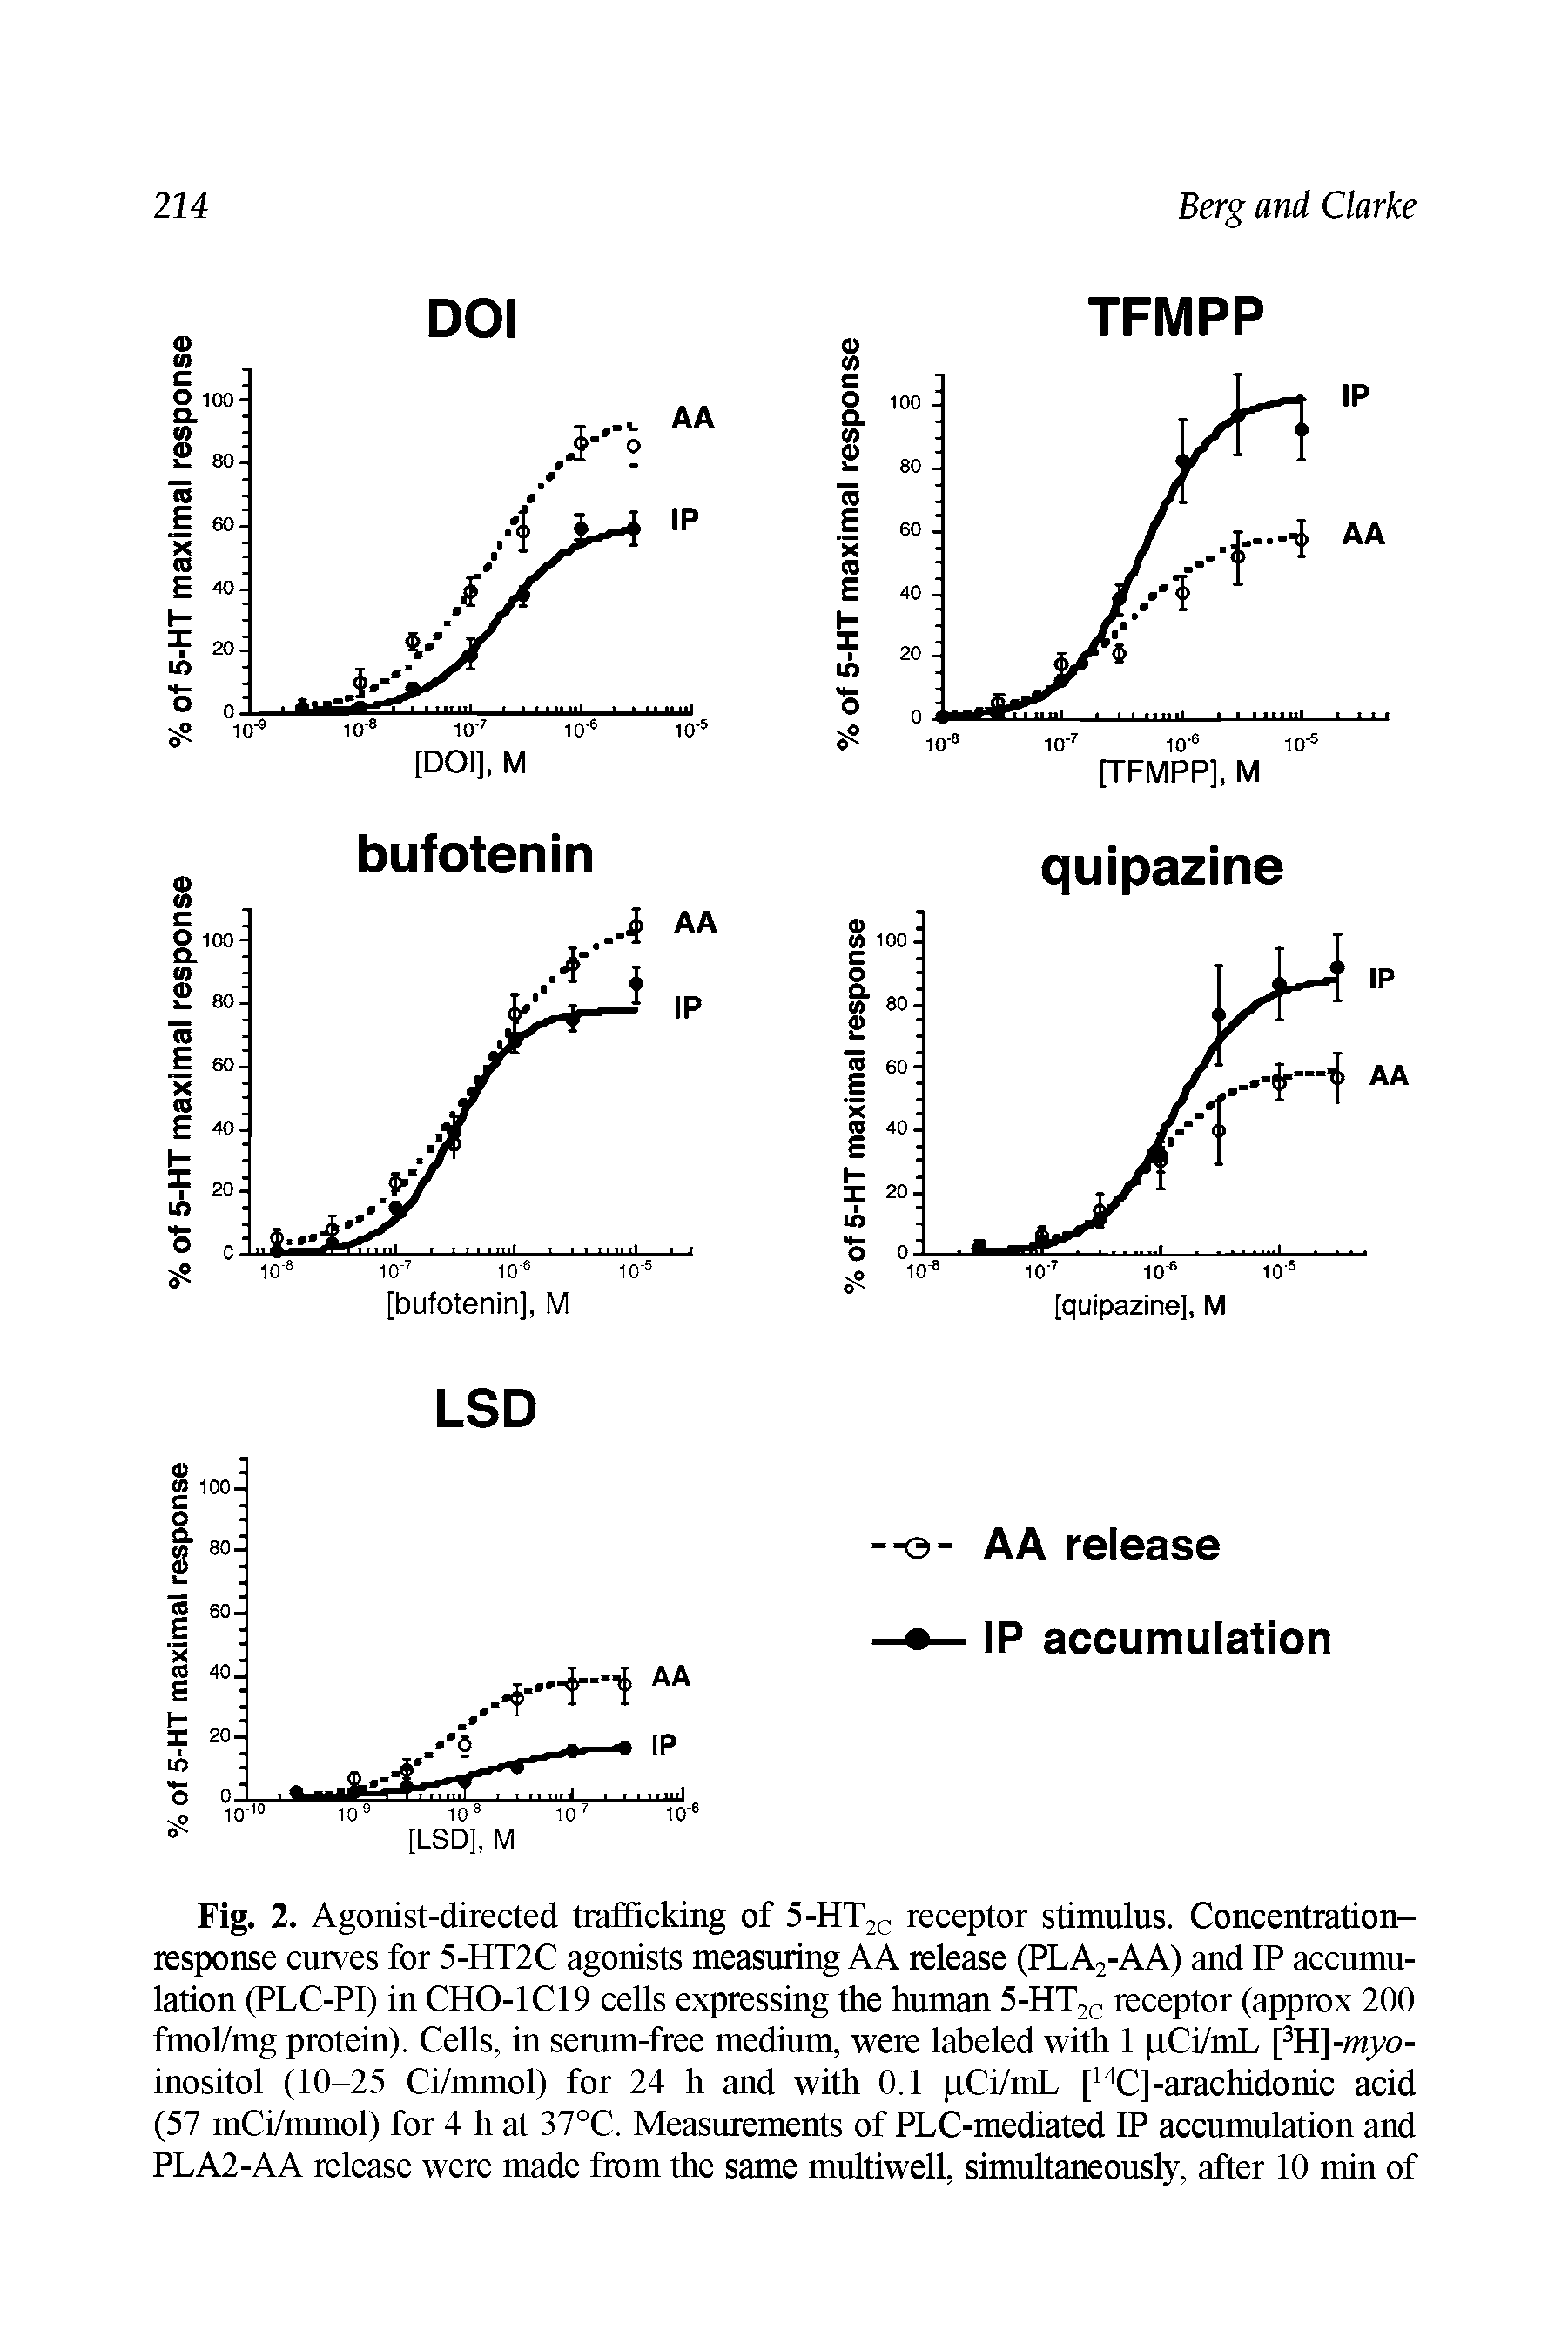 Fig. 2. Agonist-directed trafficking of 5-HT2C receptor stimulus. Concentration-response curves for 5-HT2C agonists measuring AA release (PLA2-AA) and IP accumulation (PLC-PI) in CHO-1C19 cells expressing the human 5-HT2c receptor (approx 200 fmol/mg protein). Cells, in serum-free medium, were labeled with 1 pCi/mL [3H]-myo-inositol (10-25 Ci/mmol) for 24 h and with 0.1 pCi/inL [14C]-arachidonic acid (57 mCi/mmol) for 4 h at 37°C. Measurements of PLC-mediated IP accumulation and PLA2-AA release were made from the same multiwell, simultaneously, after 10 min of...